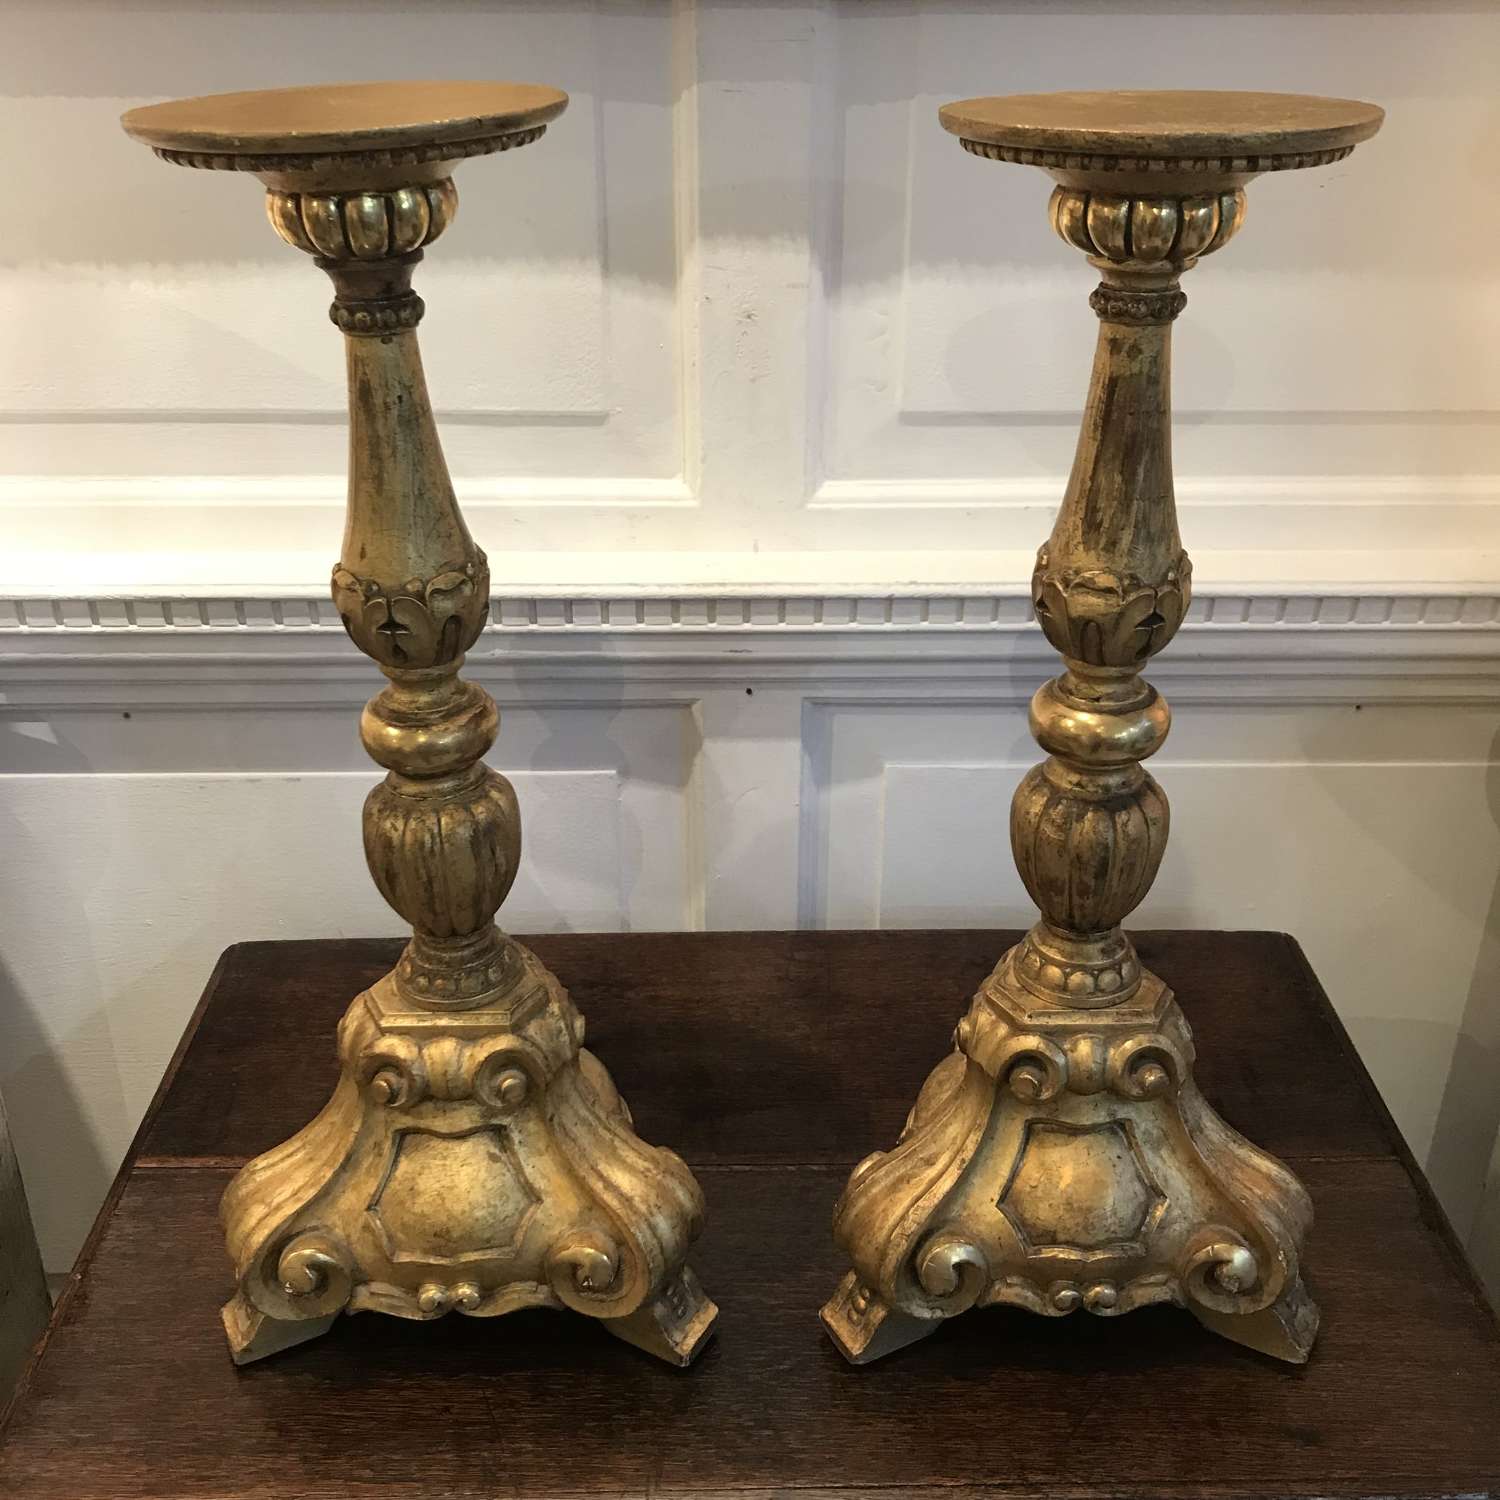 Carved and gilded Pricket sticks